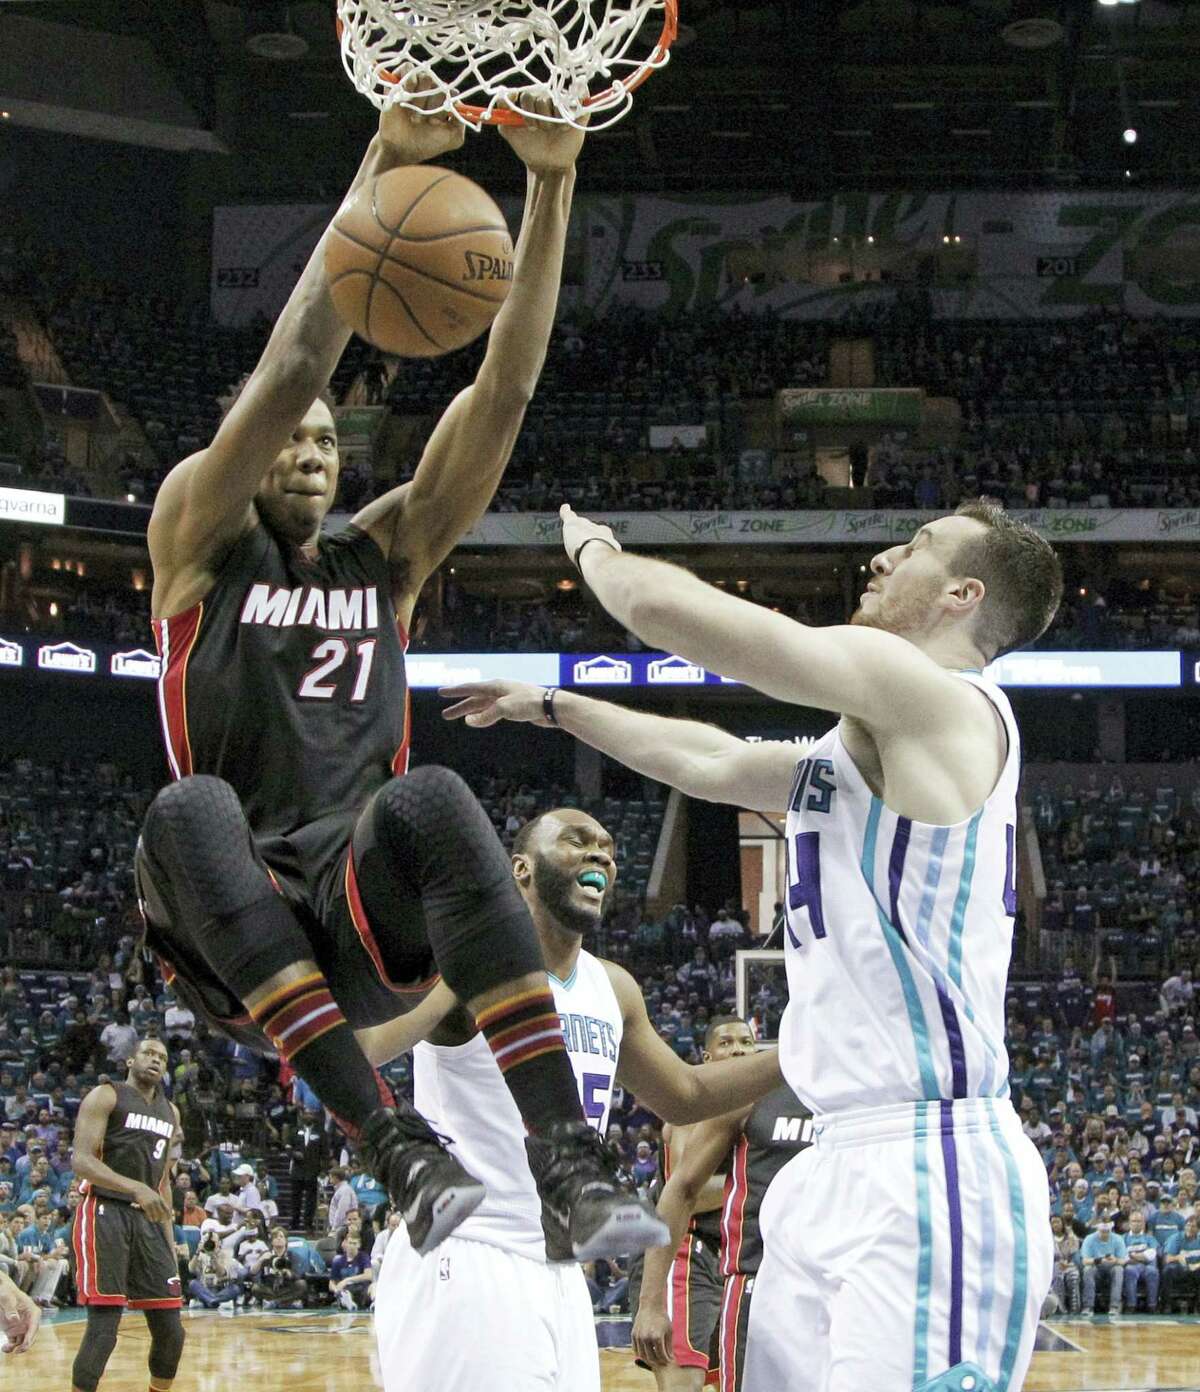 In this Monday, April 25, 2016 photo, Miami Heat’s Hassan Whiteside (21) dunks over Charlotte Hornets’ Frank Kaminsky (44) during the first half in Game 4 of an NBA basketball playoffs first-round series in Charlotte, N.C. Whiteside will be one of the most coveted targets when free agency begins FrIday, July 1, and there’s no guarantee that the center whose career was resuscitated by the Miami Heat will be back with them next season.